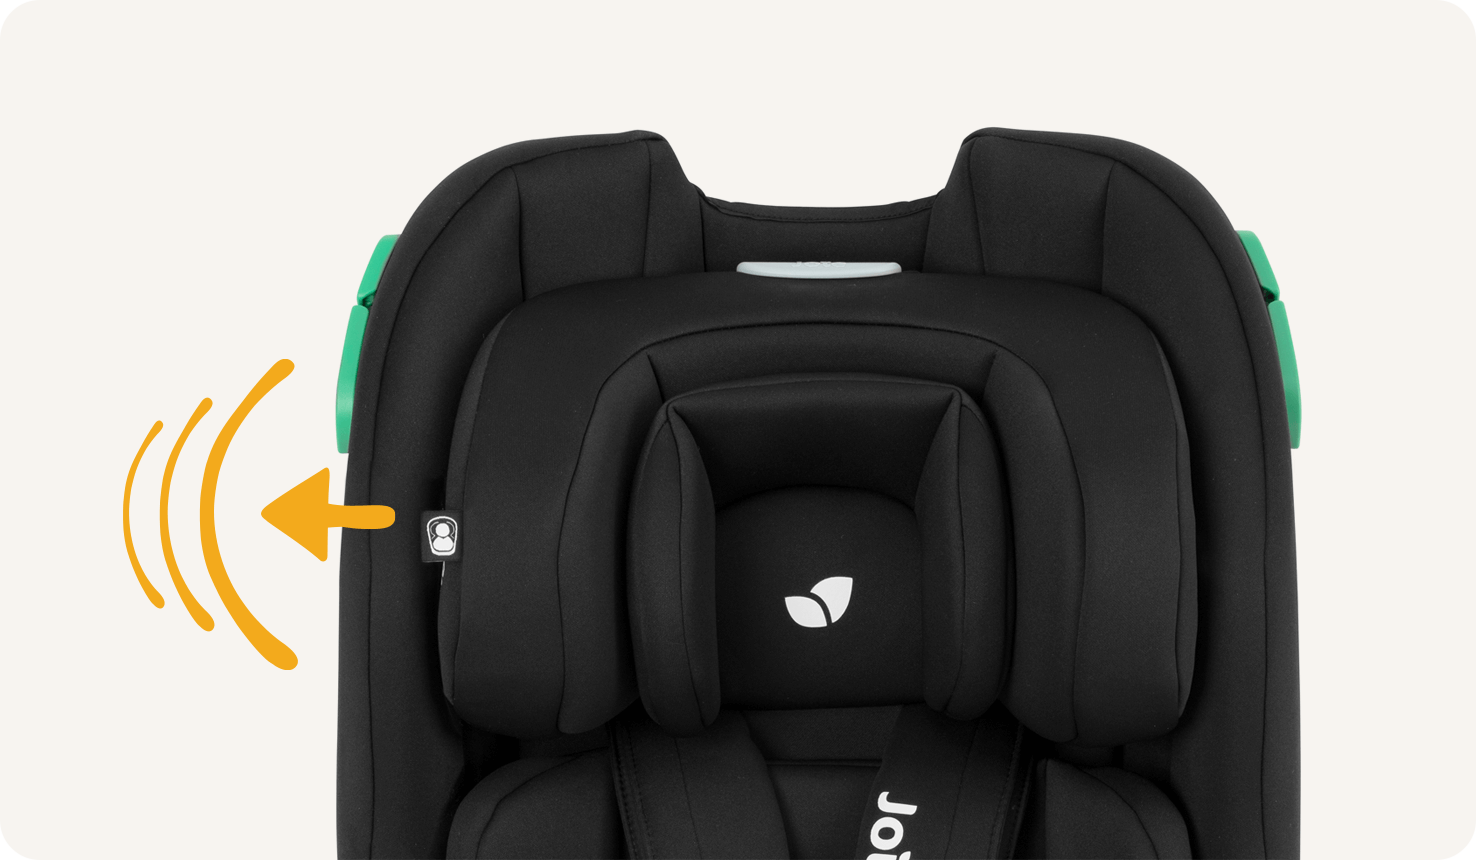 Joie Steadi R129 car seat with harness clipped in with a black colour, at an angle facing to the right and arrow pointing outward at headrest with two lines.